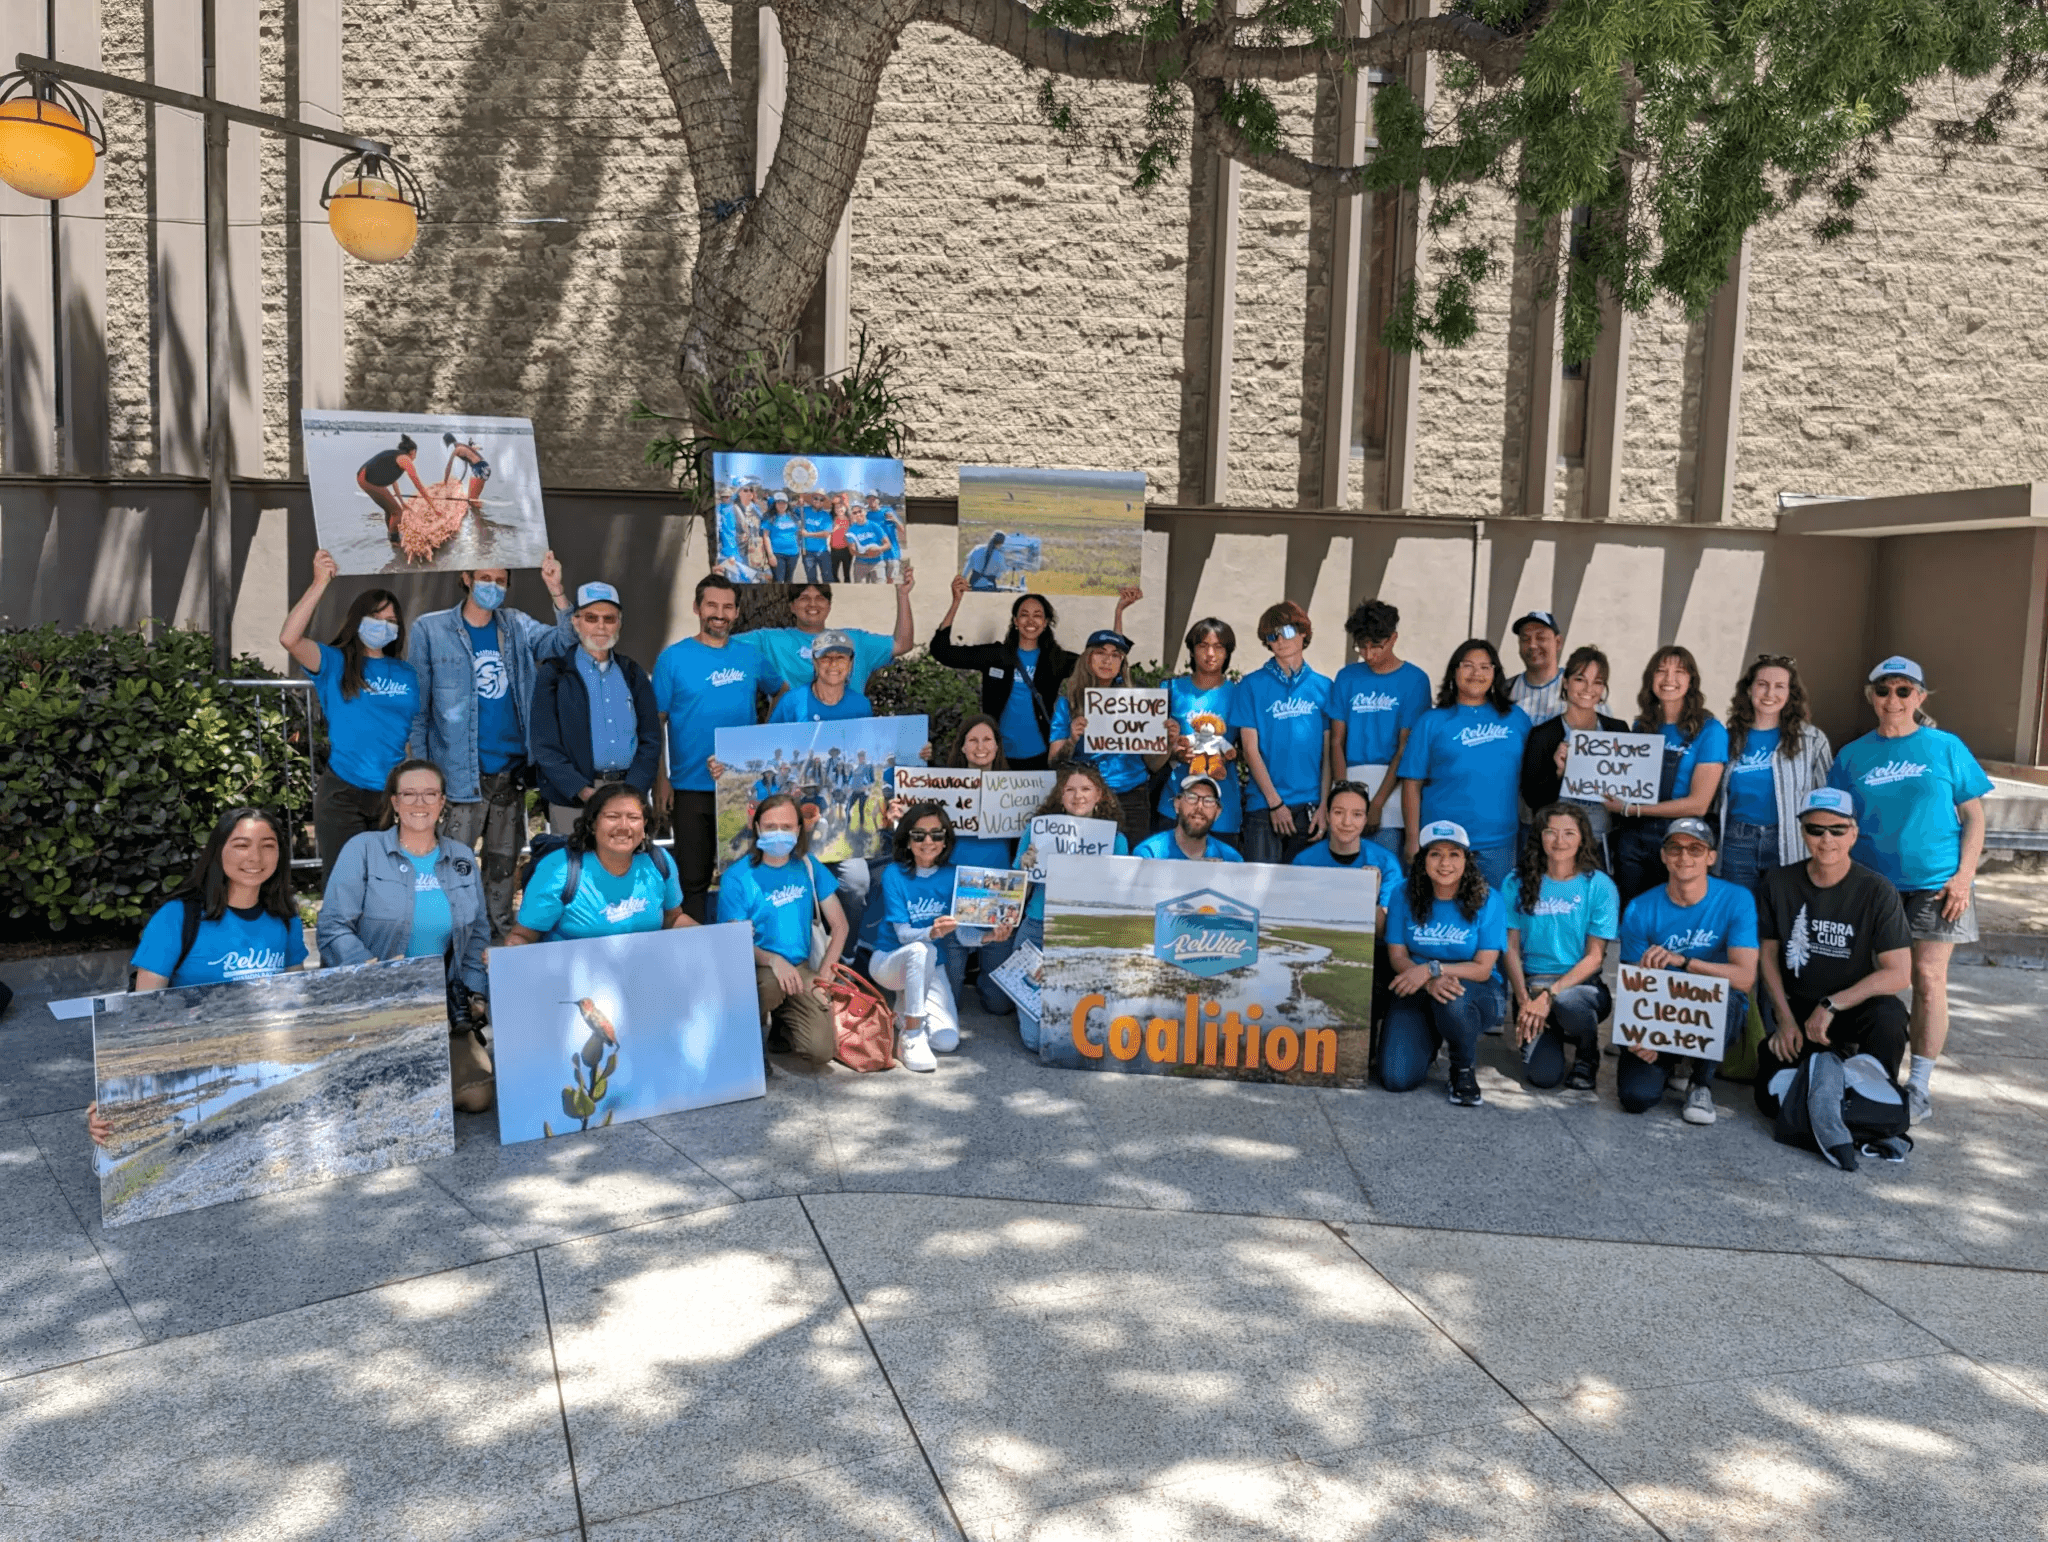 ReWild Coalition members and volunteers rallying outside the San Diego City Council office